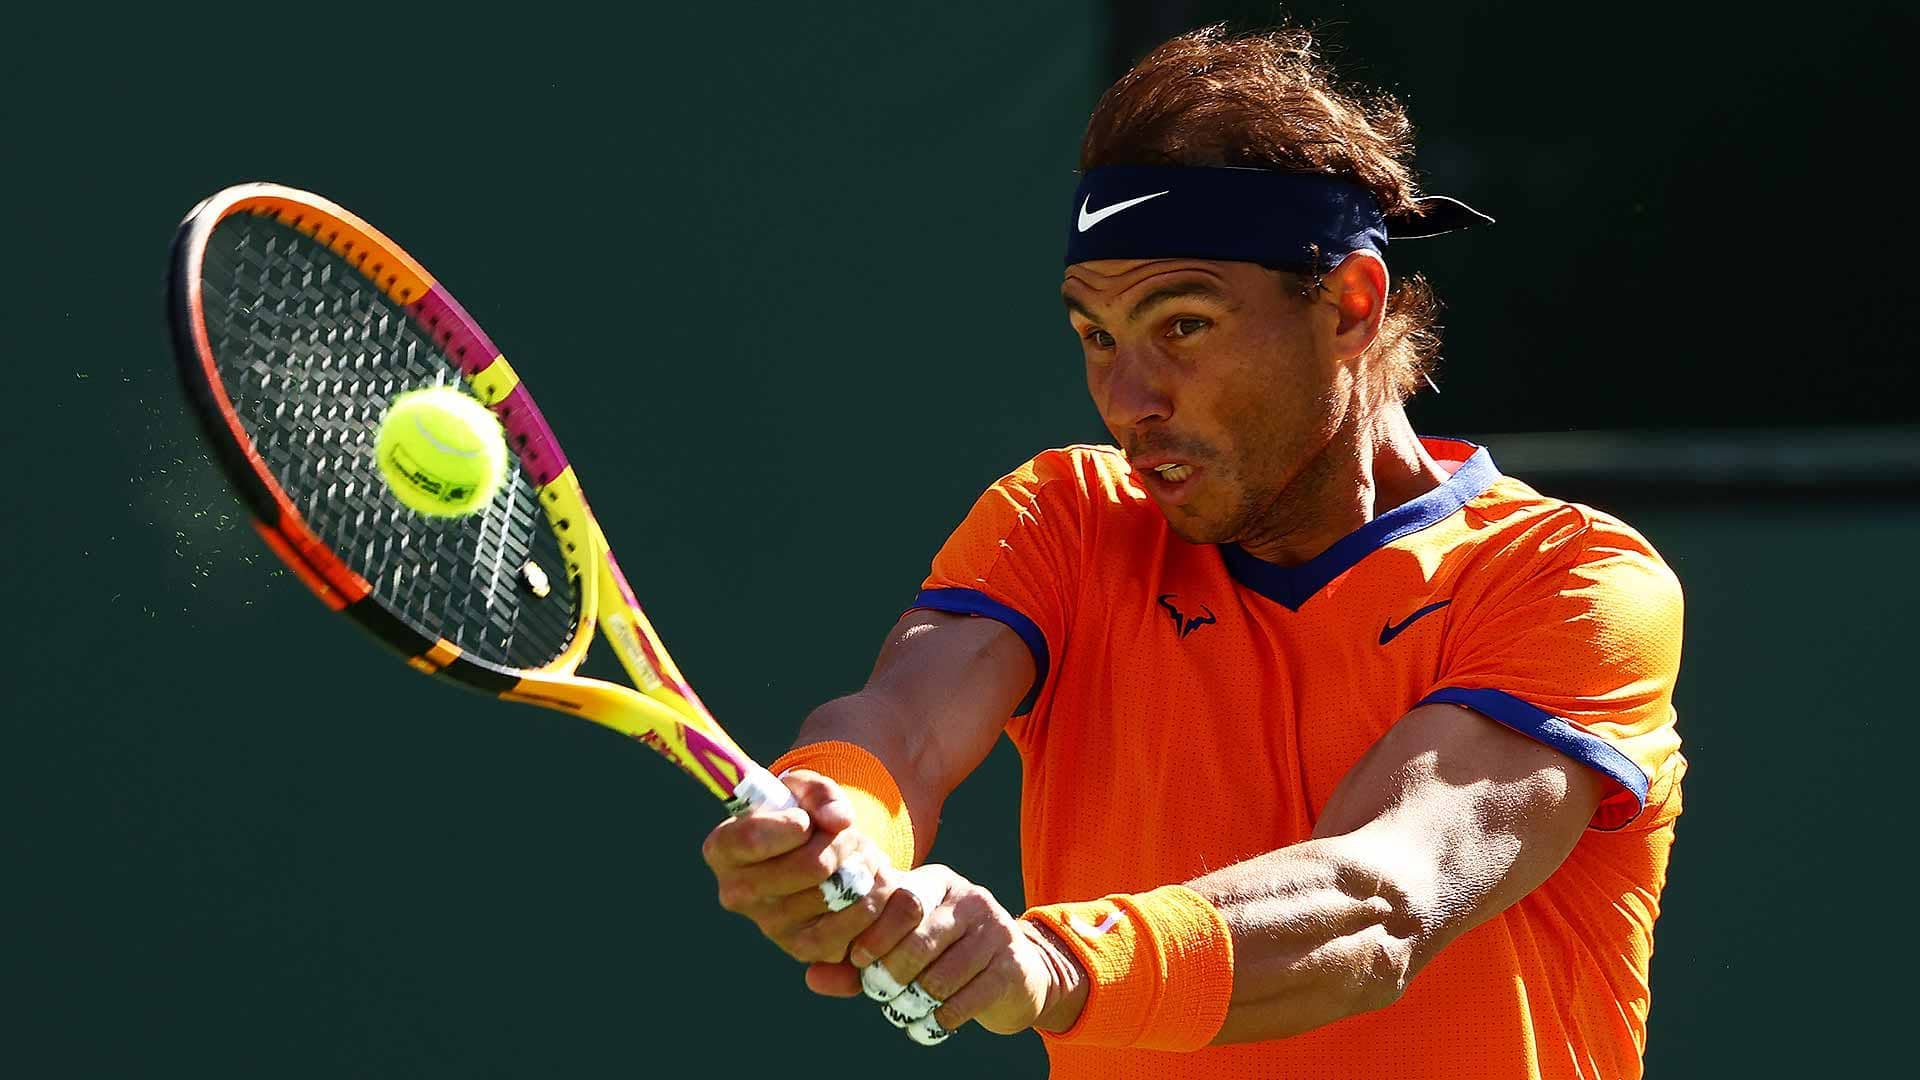 Three-time champion Rafael Nadal reached the final in 2022 during his last visit to Indian Wells.